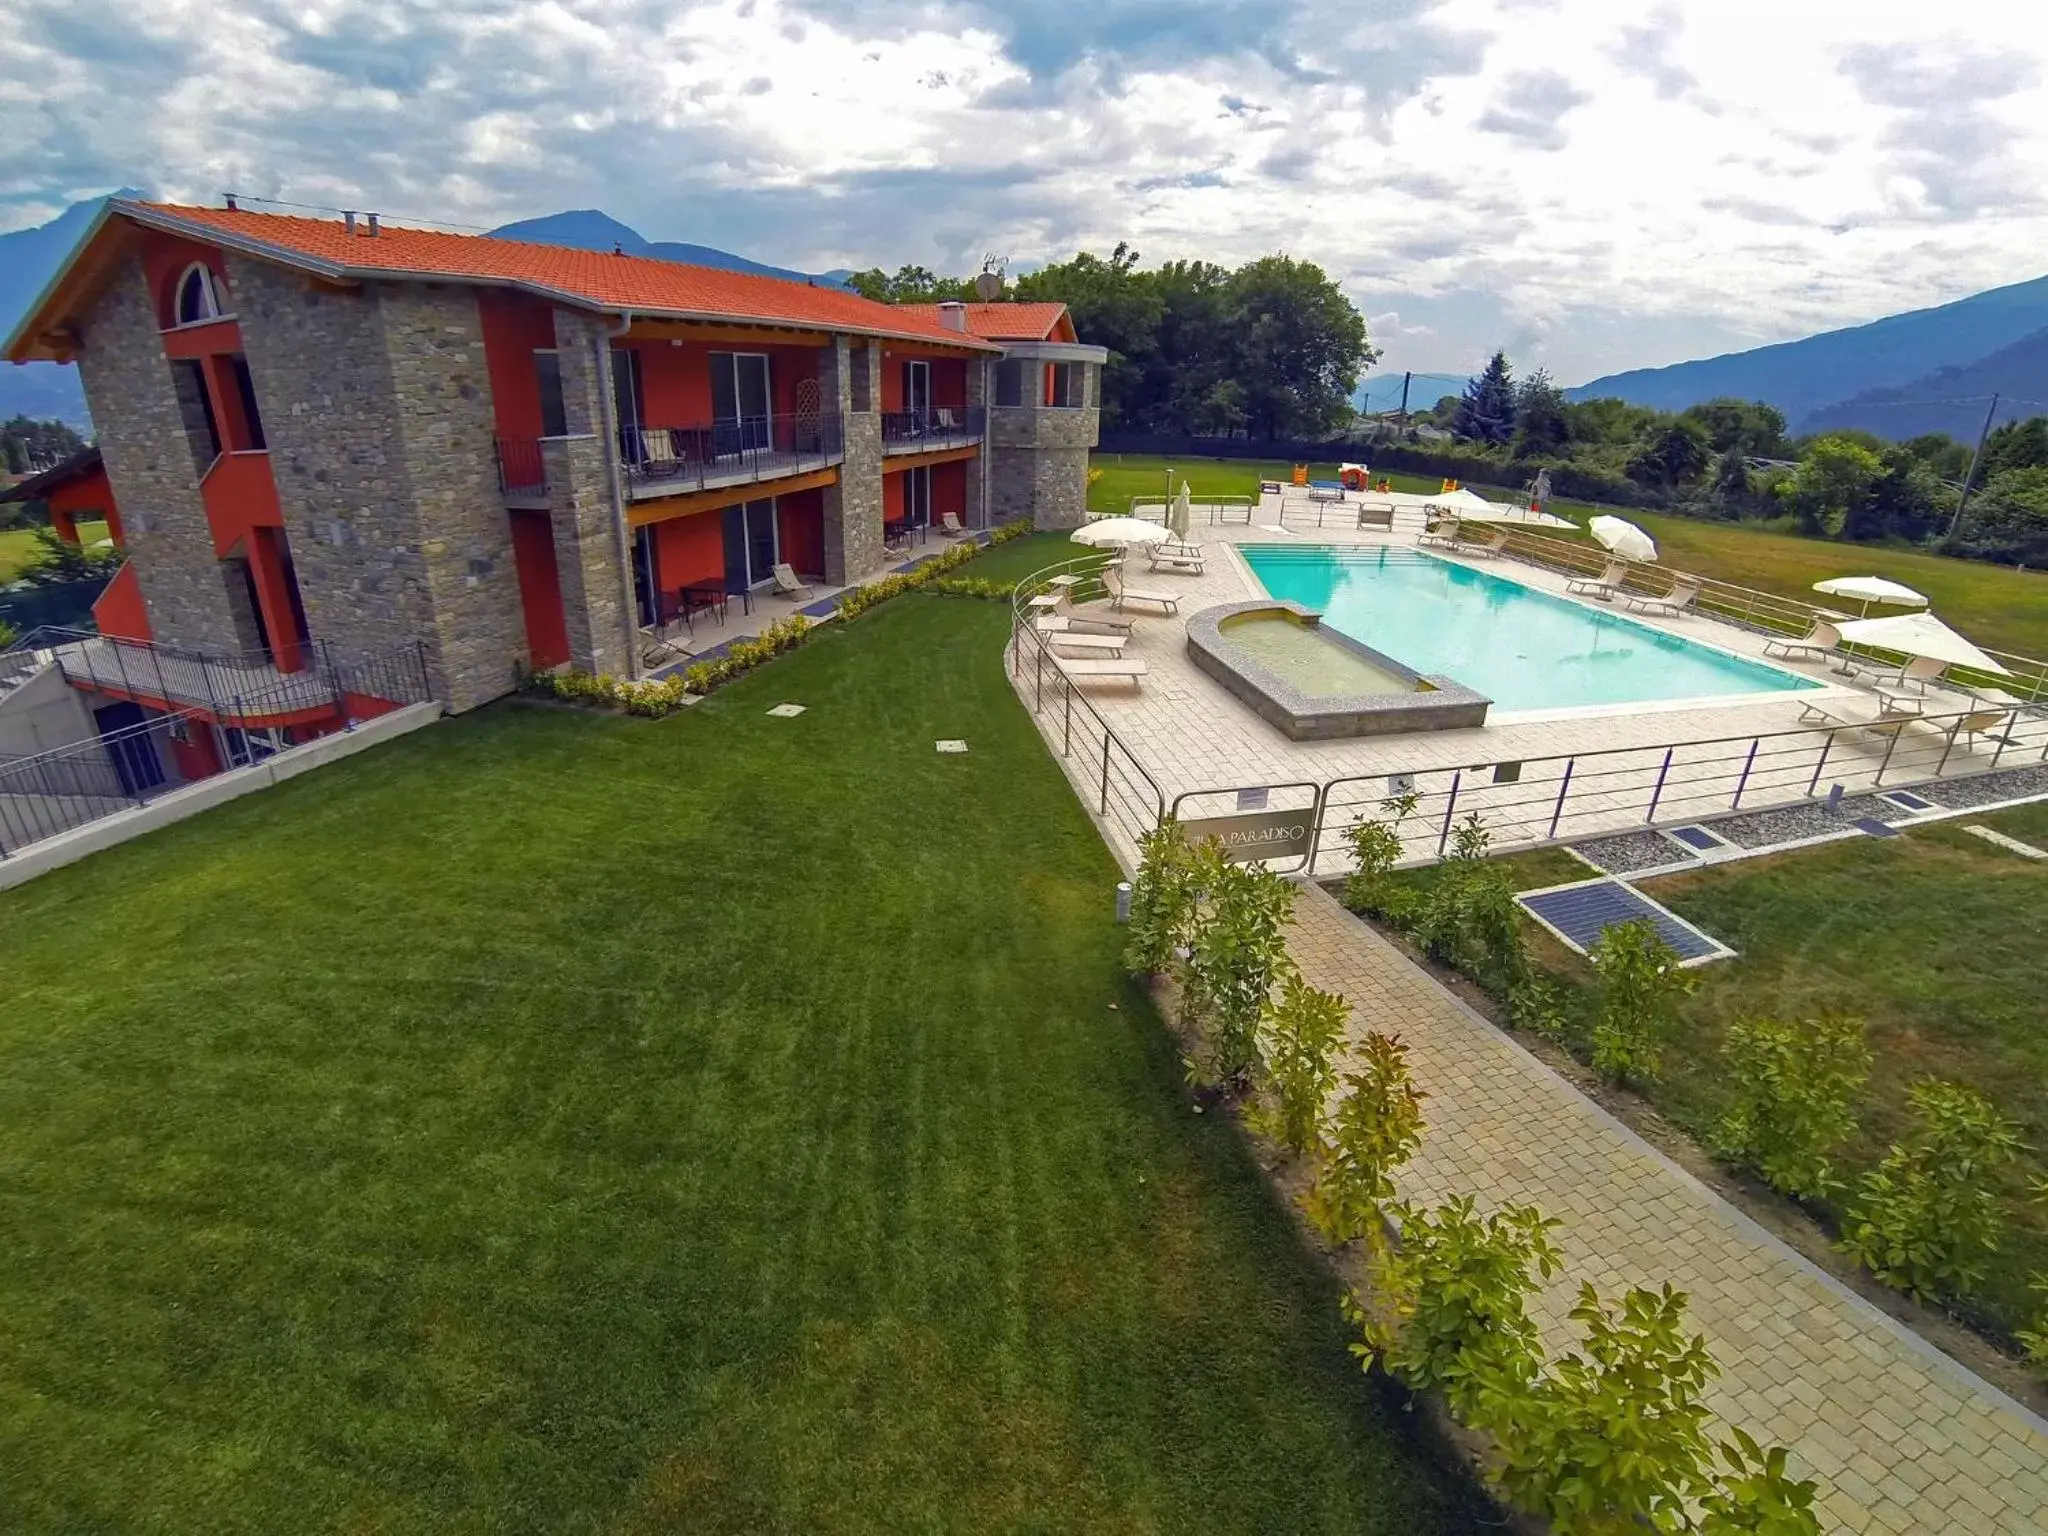 Property building, Pool View in Residence Villa Paradiso